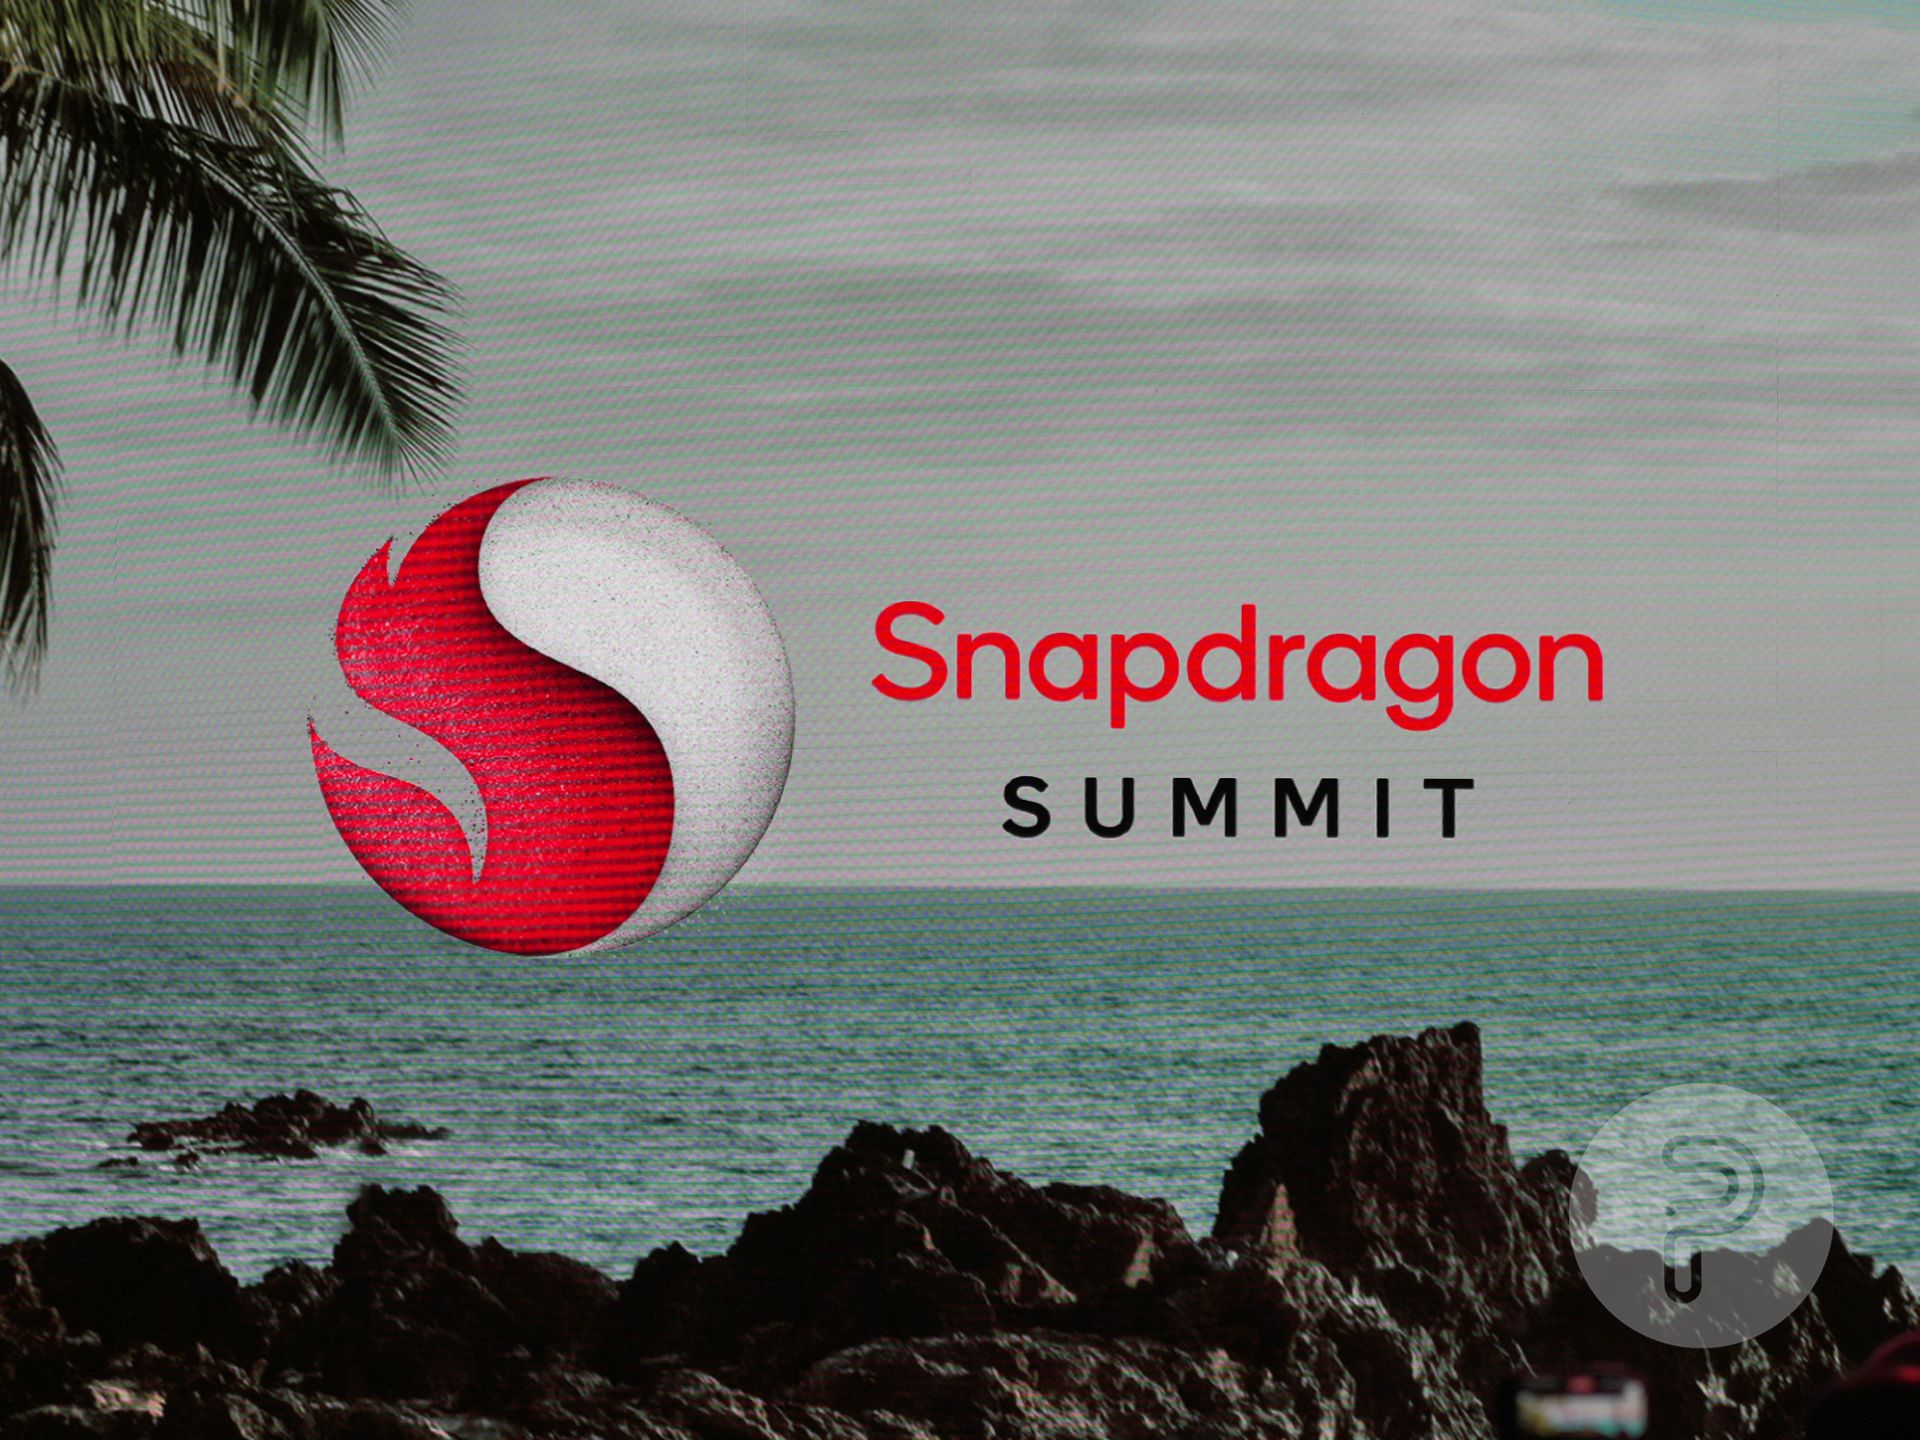 Snapdragon Summit Event recap and everything you need to know